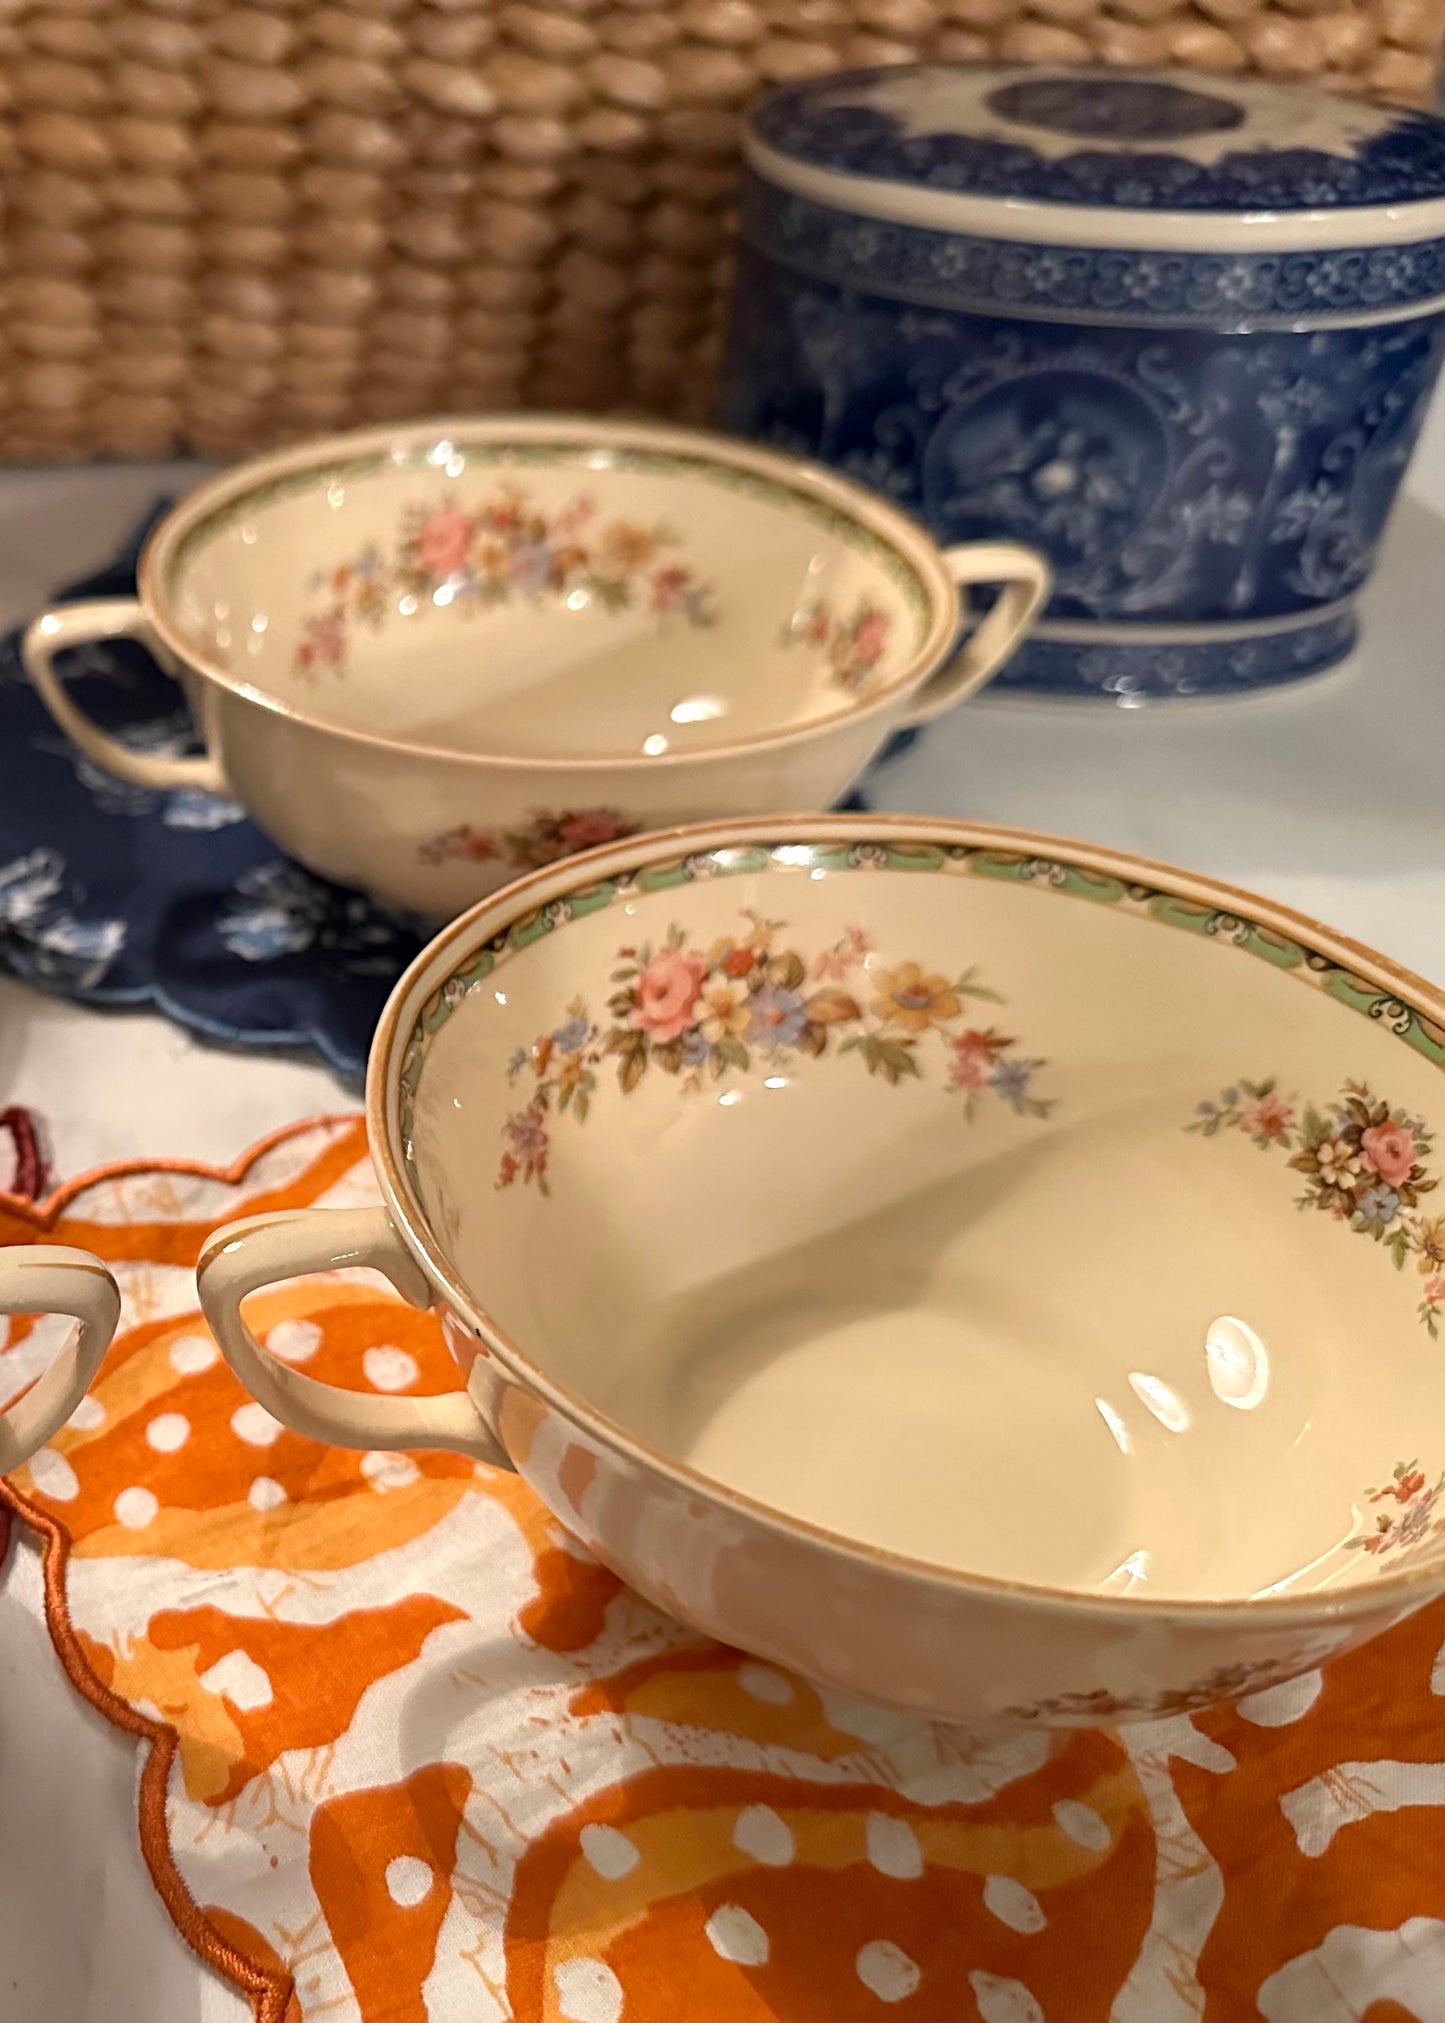 Vintage english soup bowls with under plates by Johnson Brothers #JohnsonBrothers #SoupPlates #VintageBowls - DharBazaar